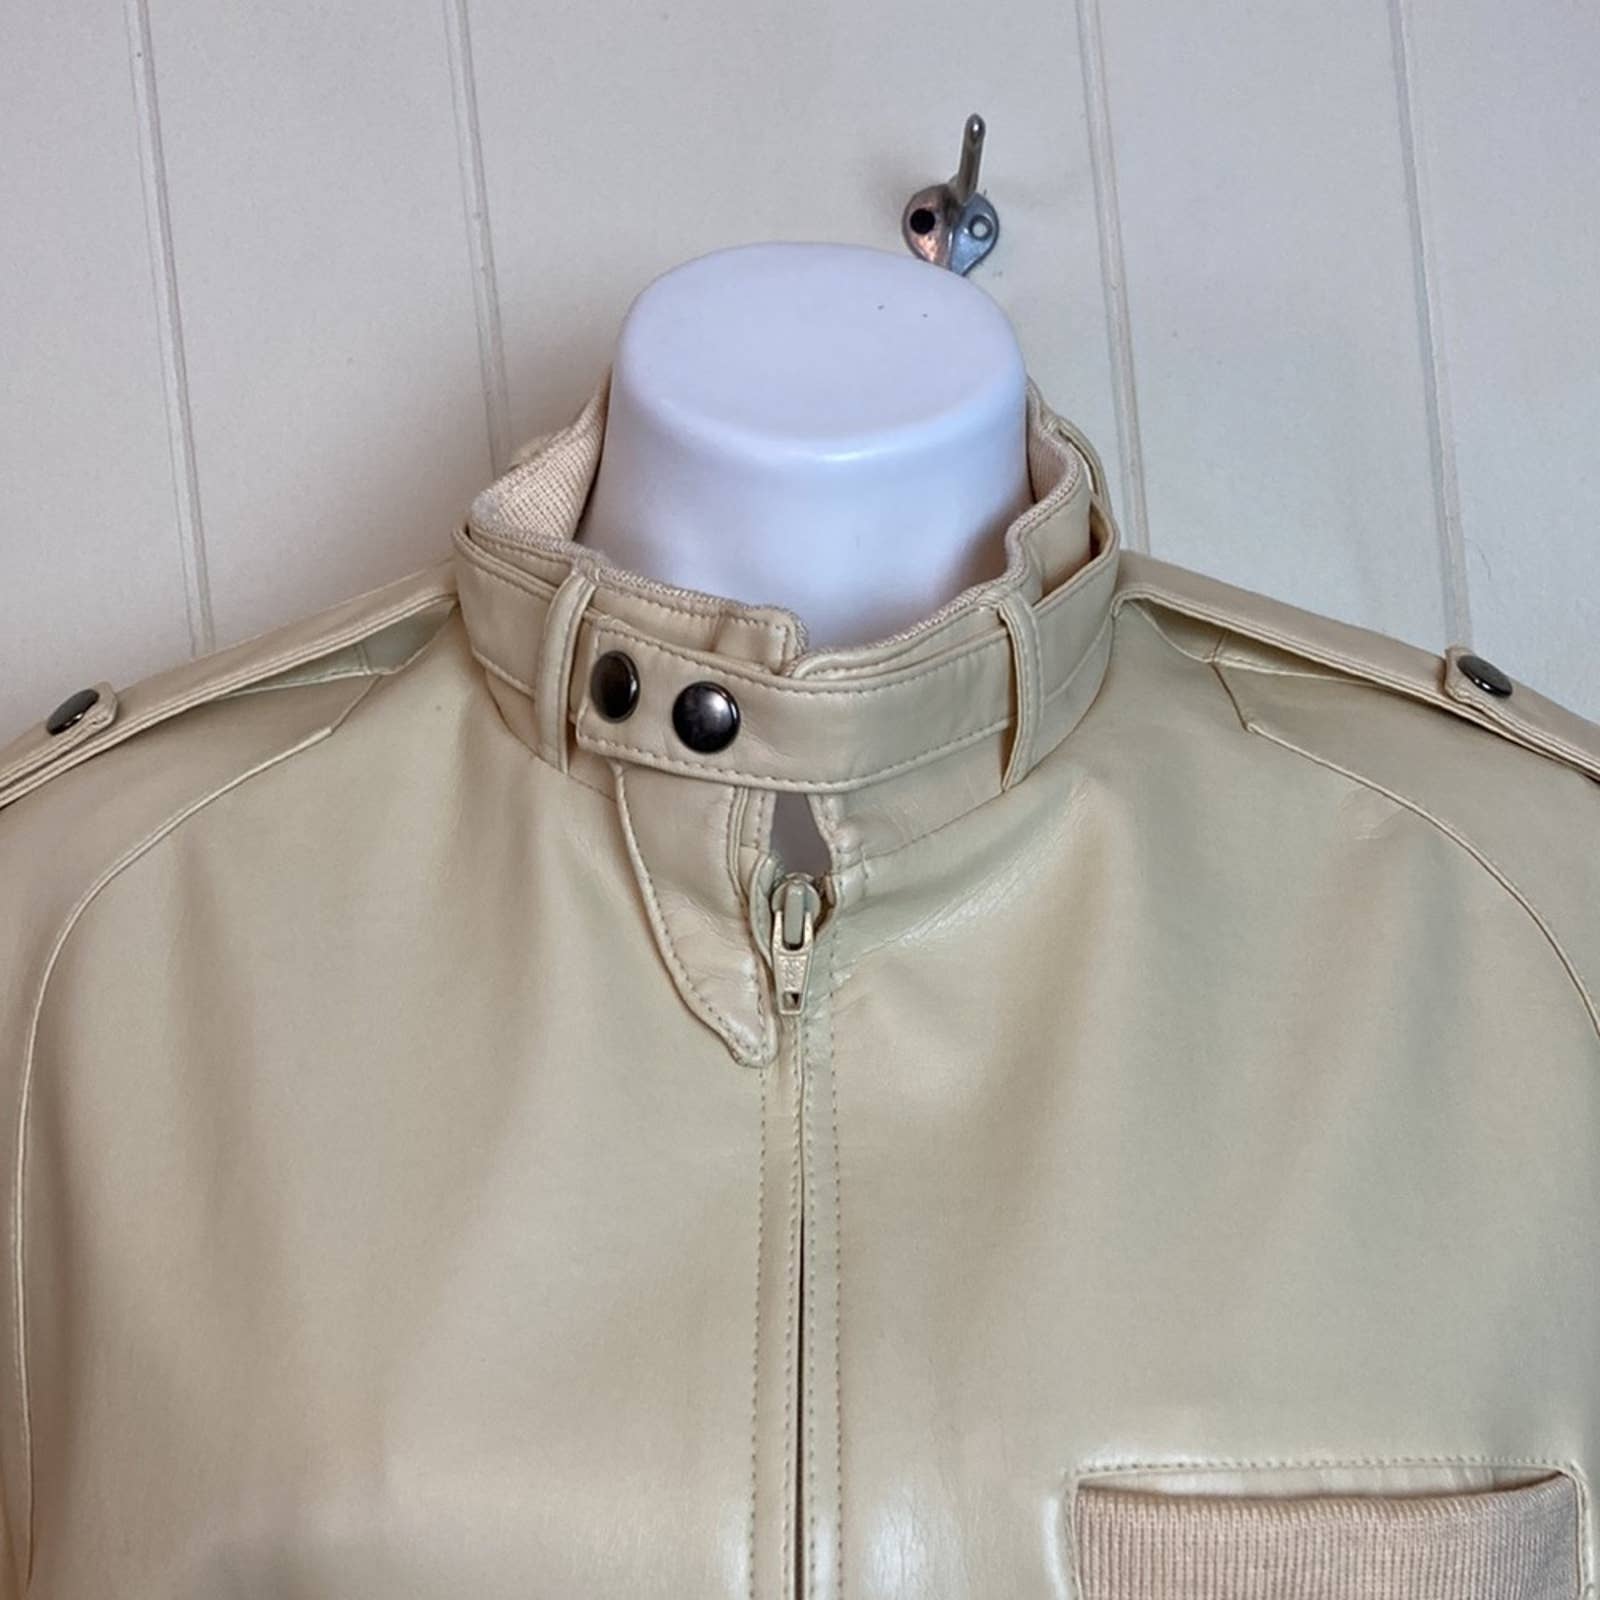 Unisex Leather Bomber Jacket Please Look More Styles for Sale in Everett,  WA - OfferUp